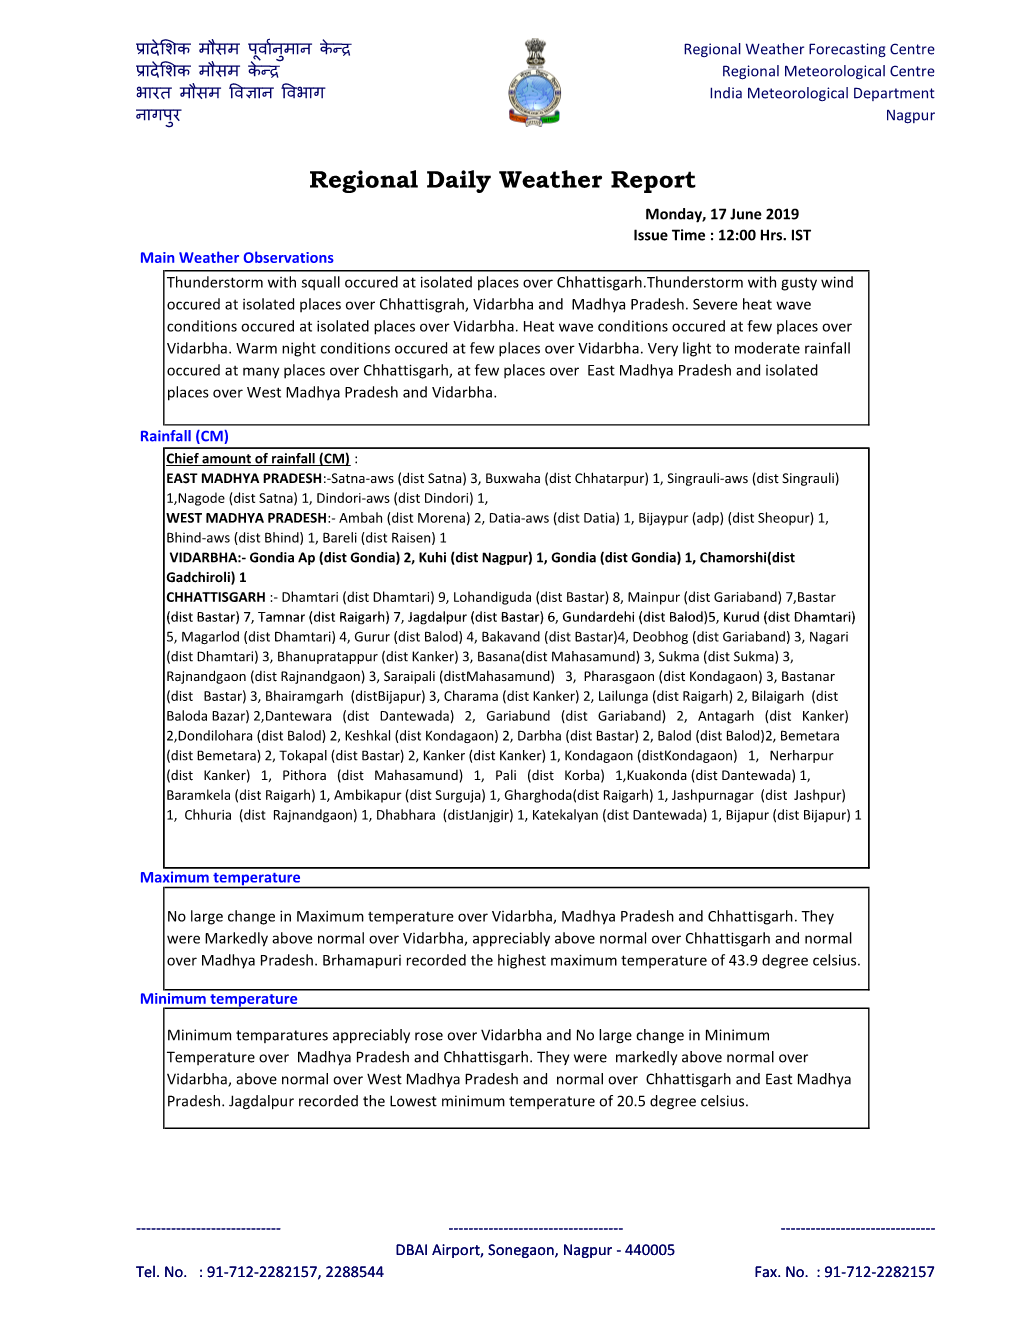 Regional Daily Weather Report Monday, 17 June 2019 Issue Time : 12:00 Hrs